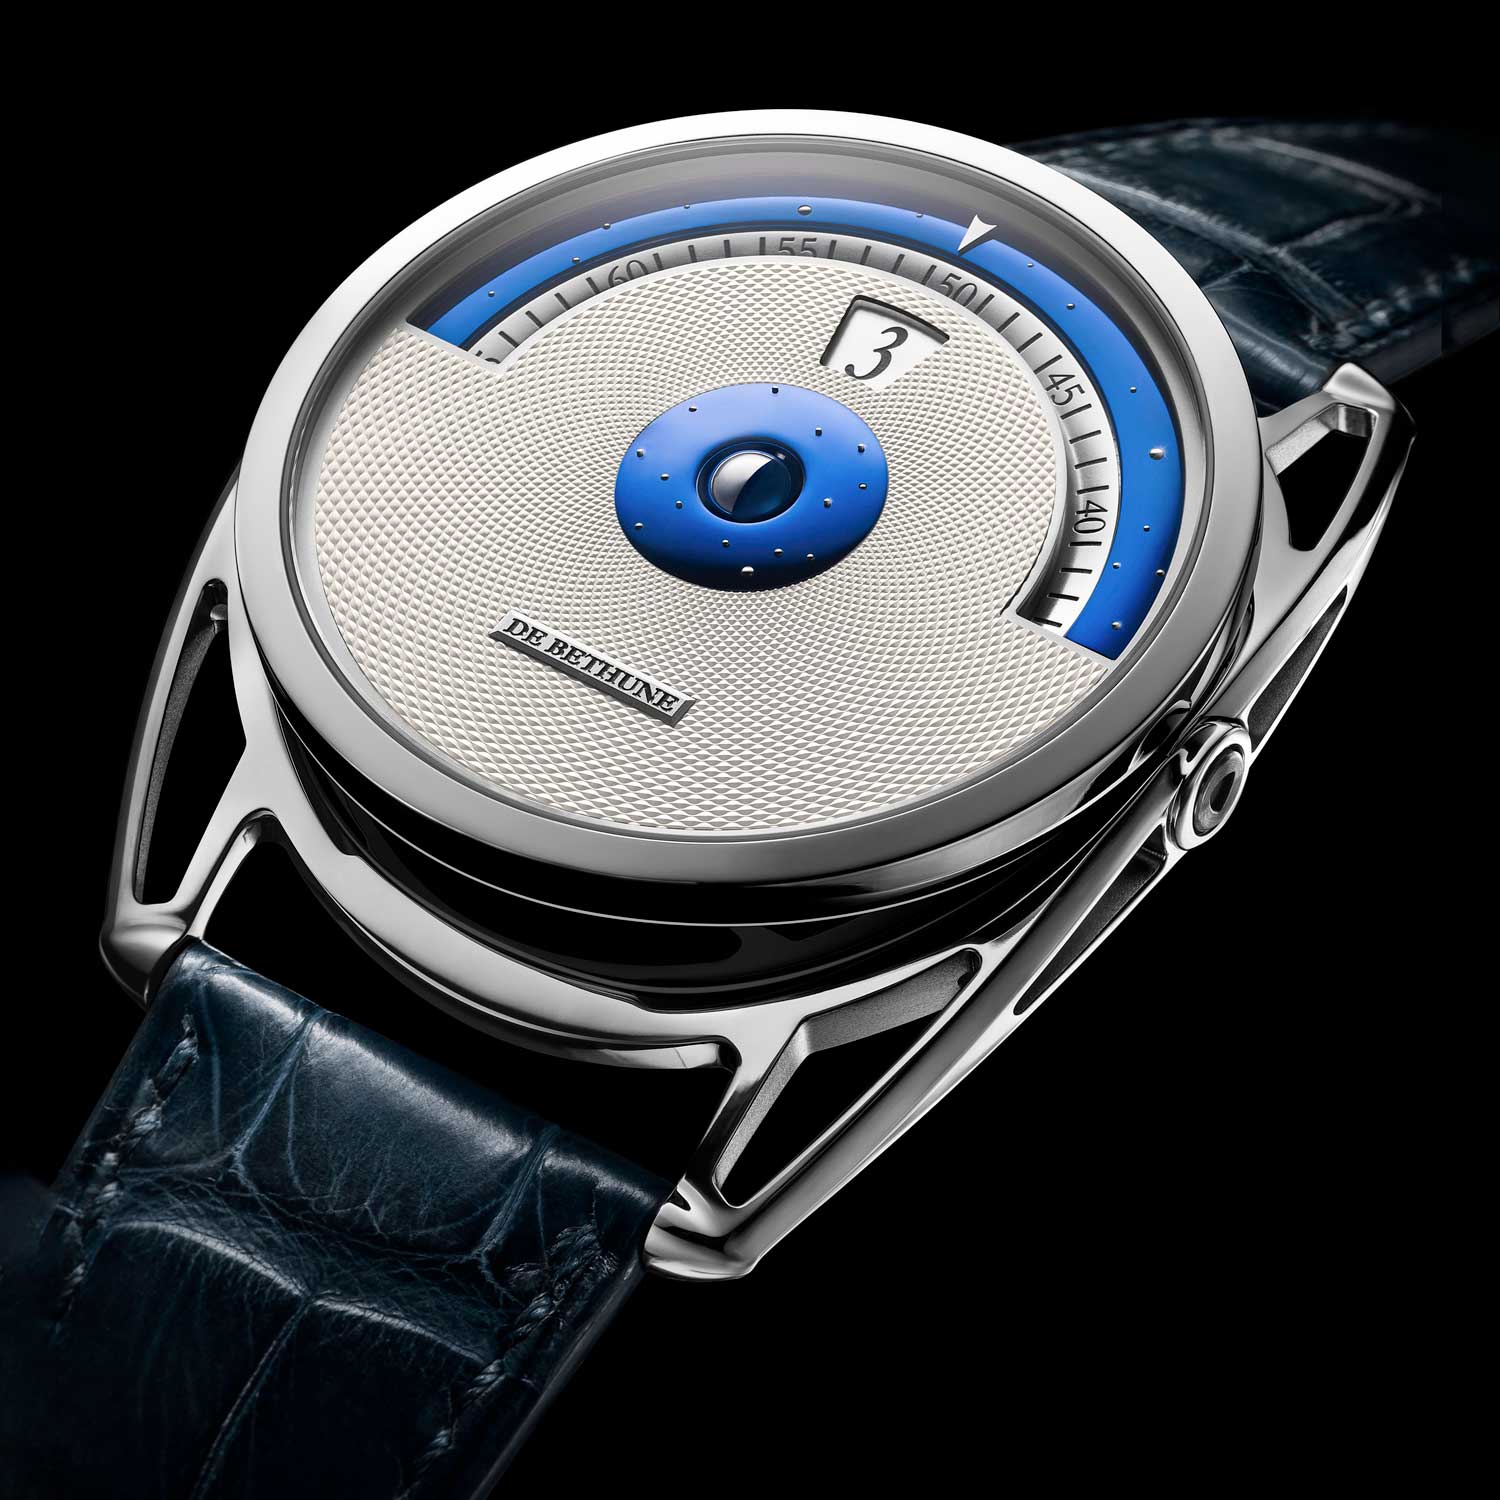 The DB28 series represents the brand’s signature innovations – the balance wheel facing the front of the watch with the balance in silicon and a ring of platinum, the in-house hairspring with patented terminal curve, and the triple parachute anti-shock system. Seen here is the DB28 Digitale